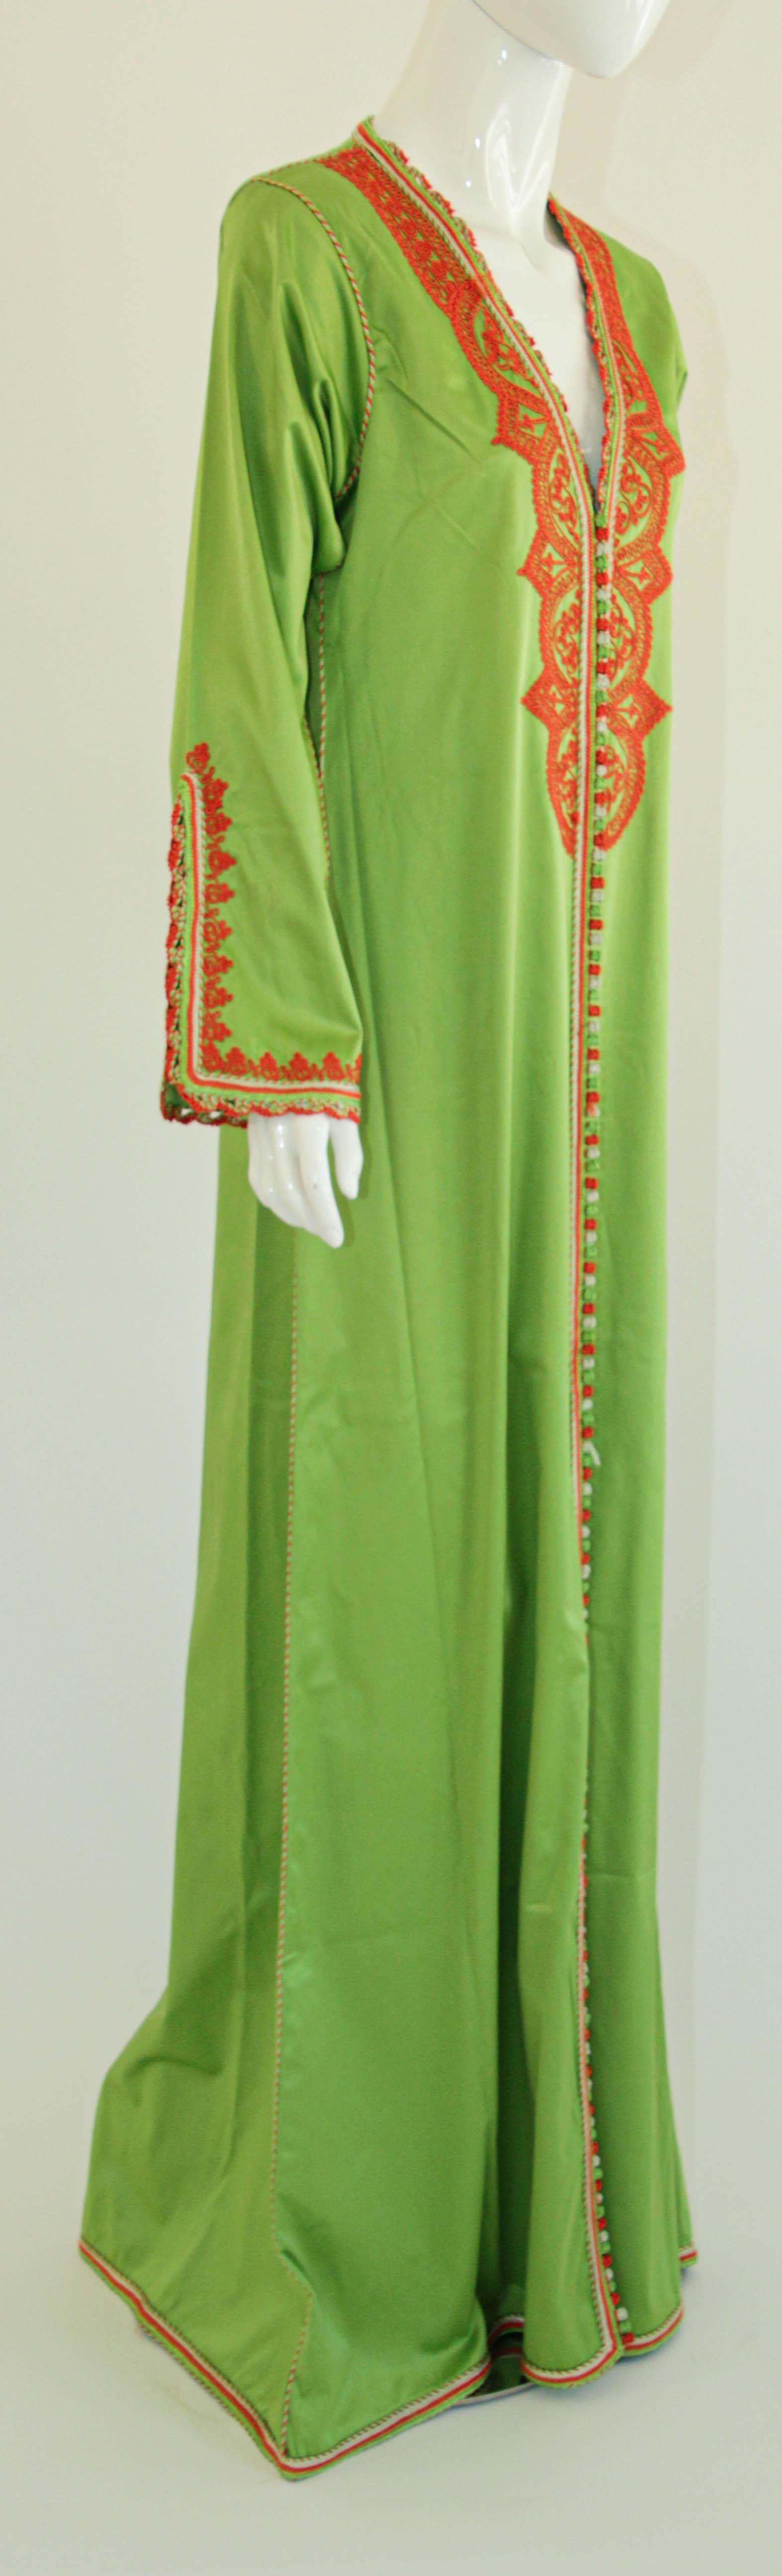 Vintage Moroccan Green Kaftan with Orange Embroideries For Sale 10